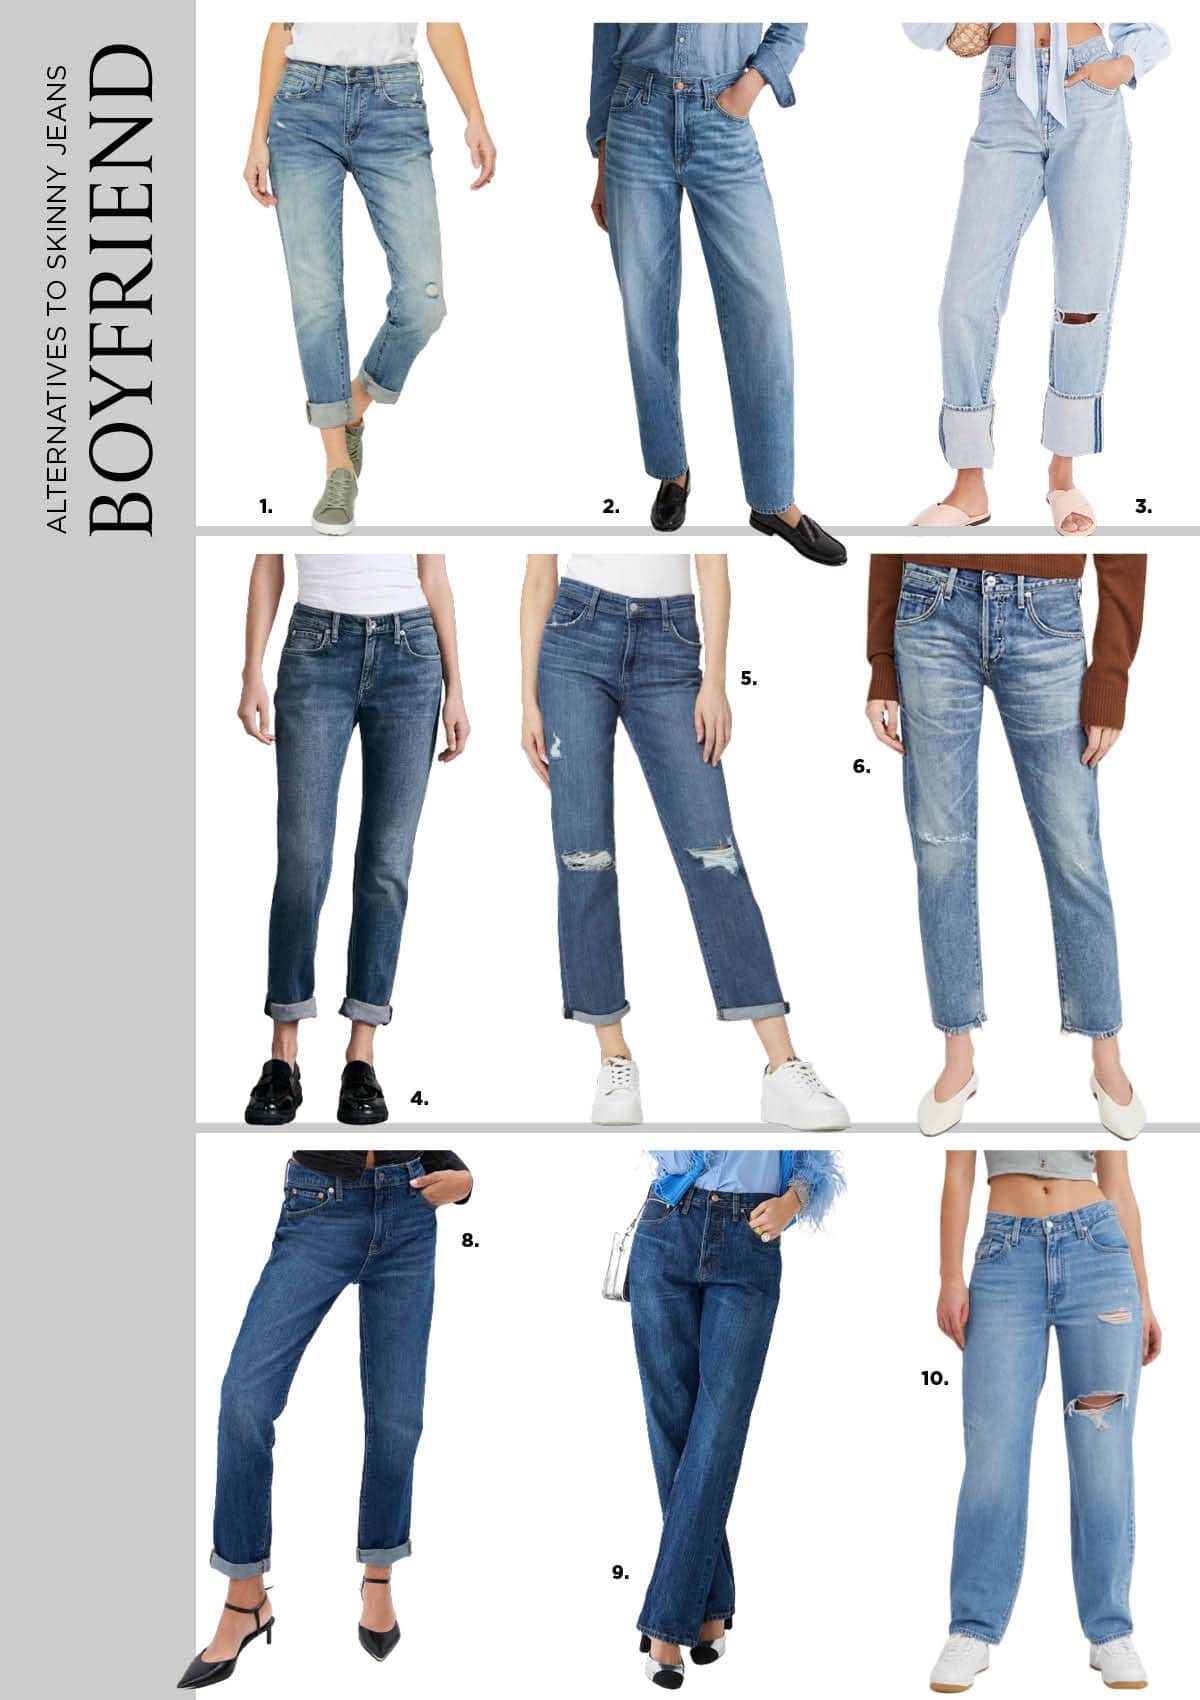 Skinny Jeans are out of style. Try these alternatives. Boyfriend jeans may look a bit baggy but they are extremely comfortable and flattering when you find the right pair. Try this trending boyfriend cut denim to replace your skinny jeans.